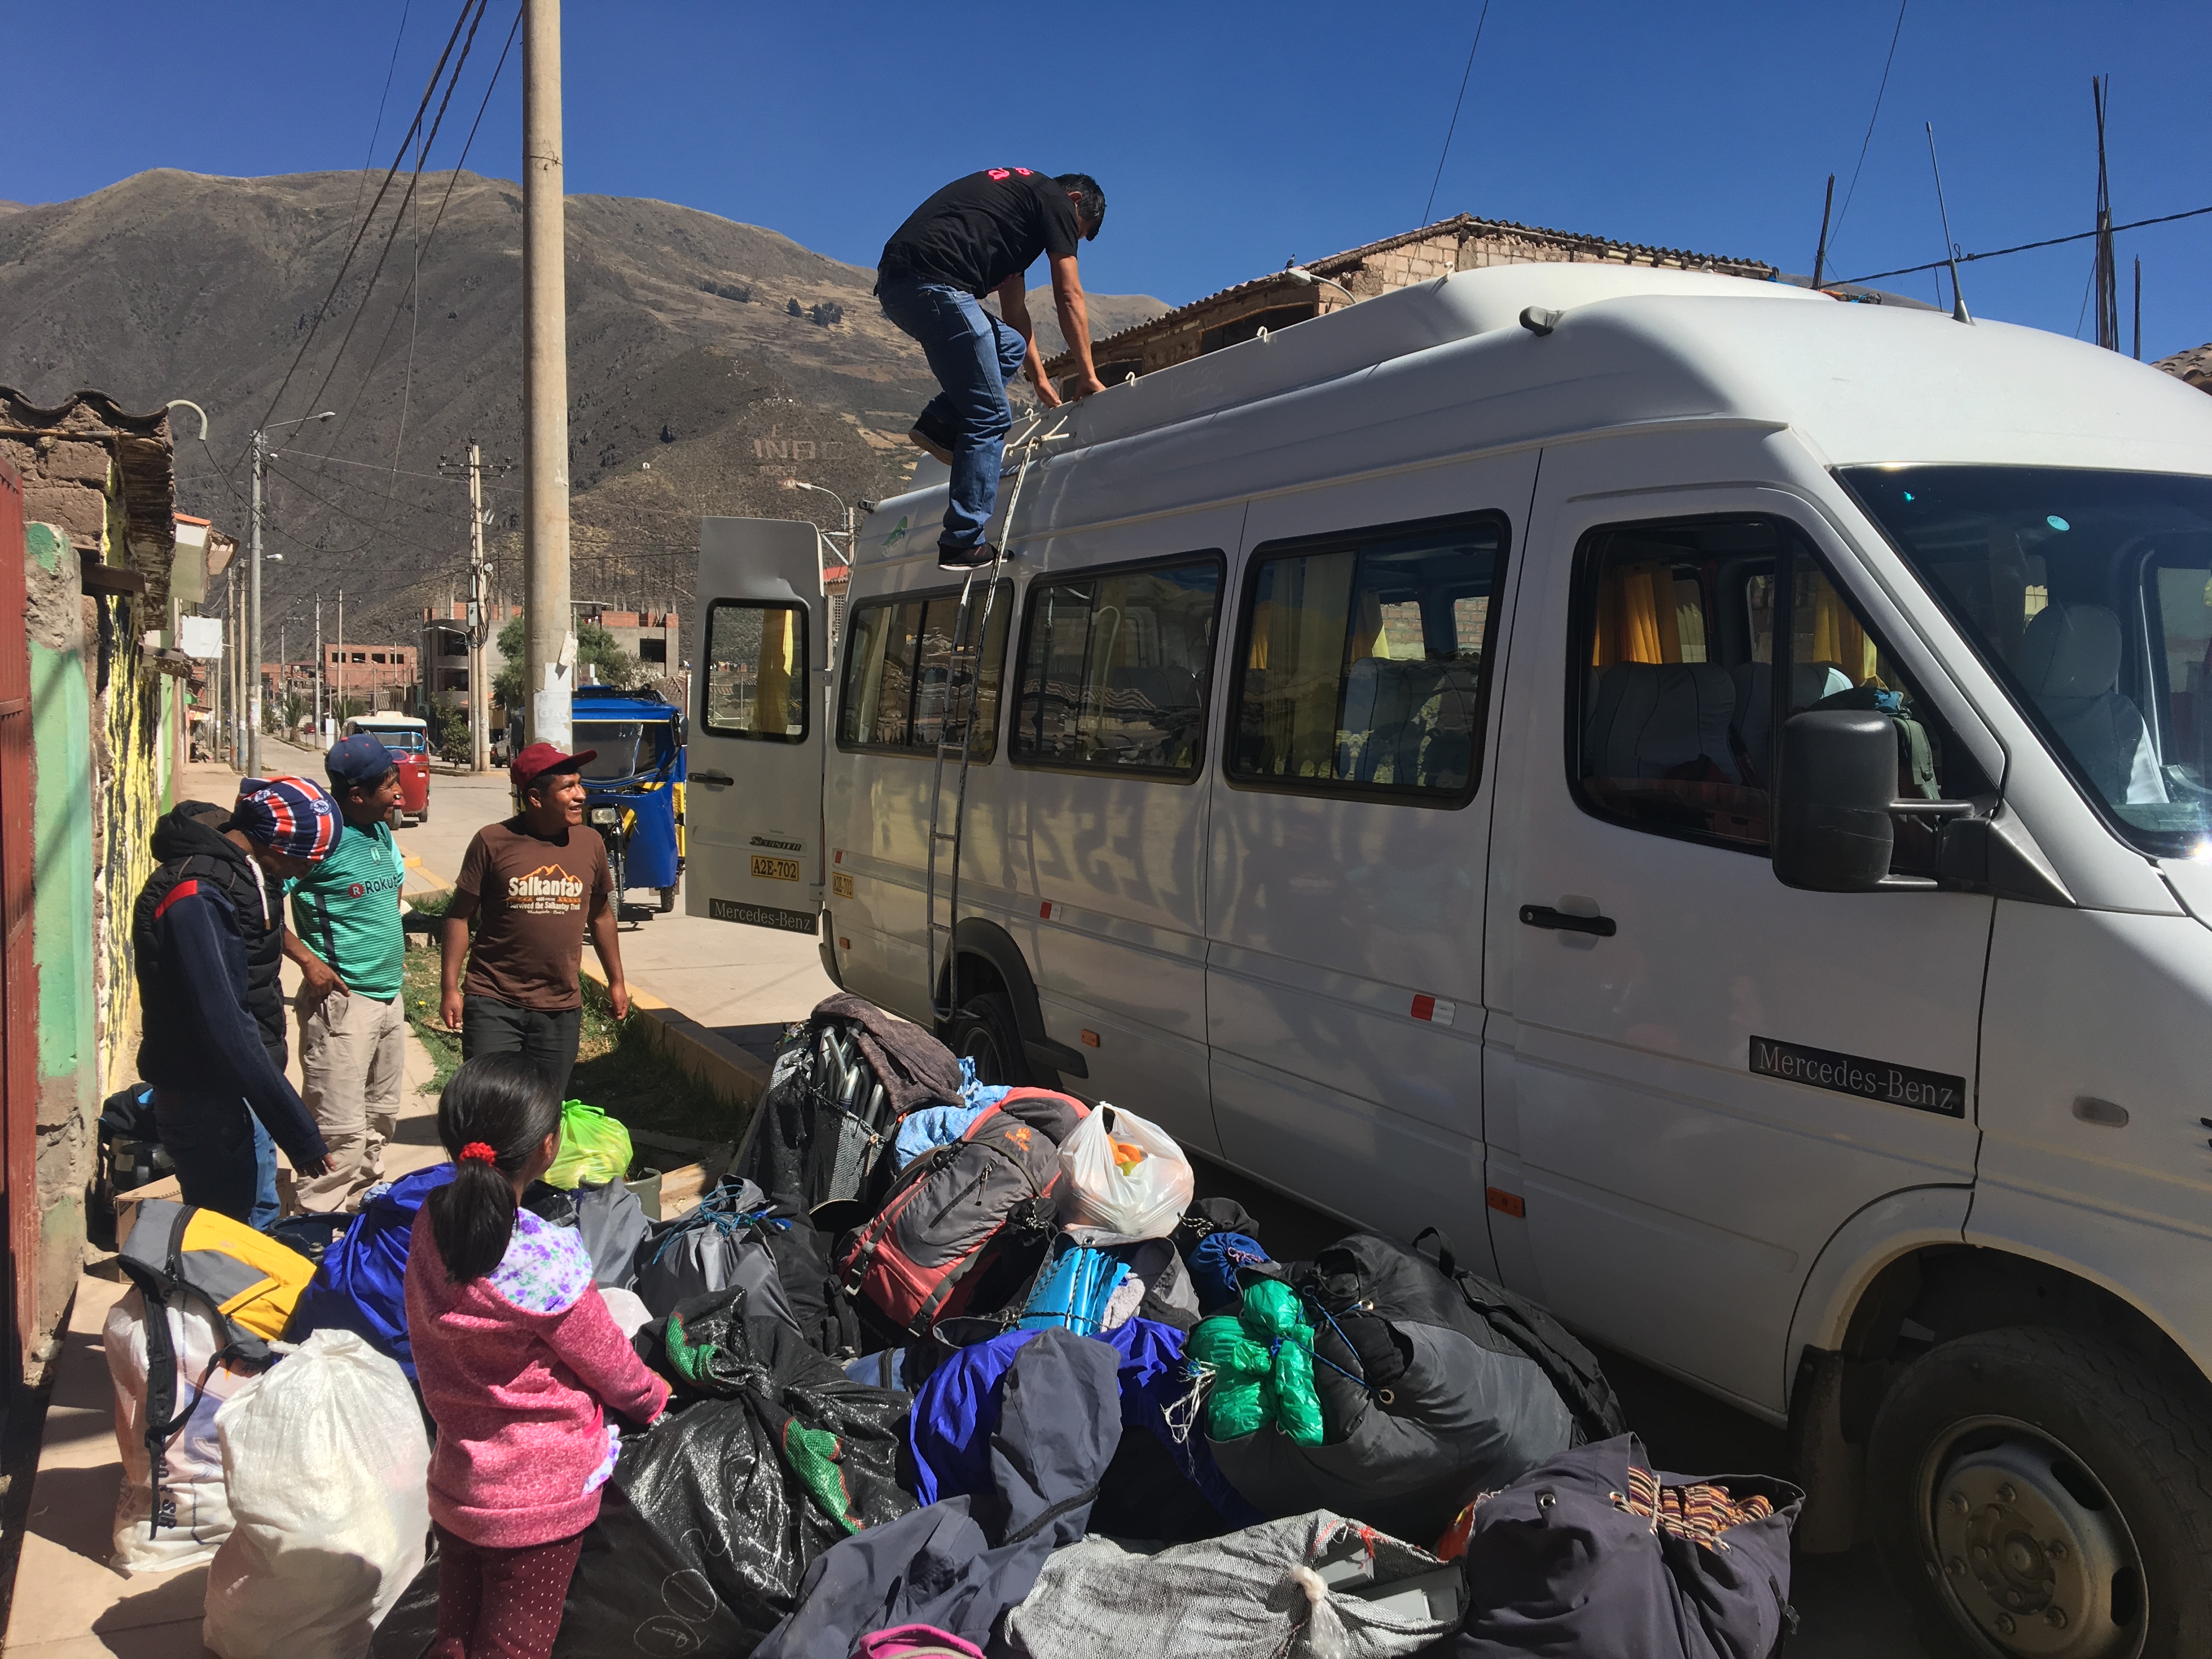 Preparing to Leave for the Inca Trail